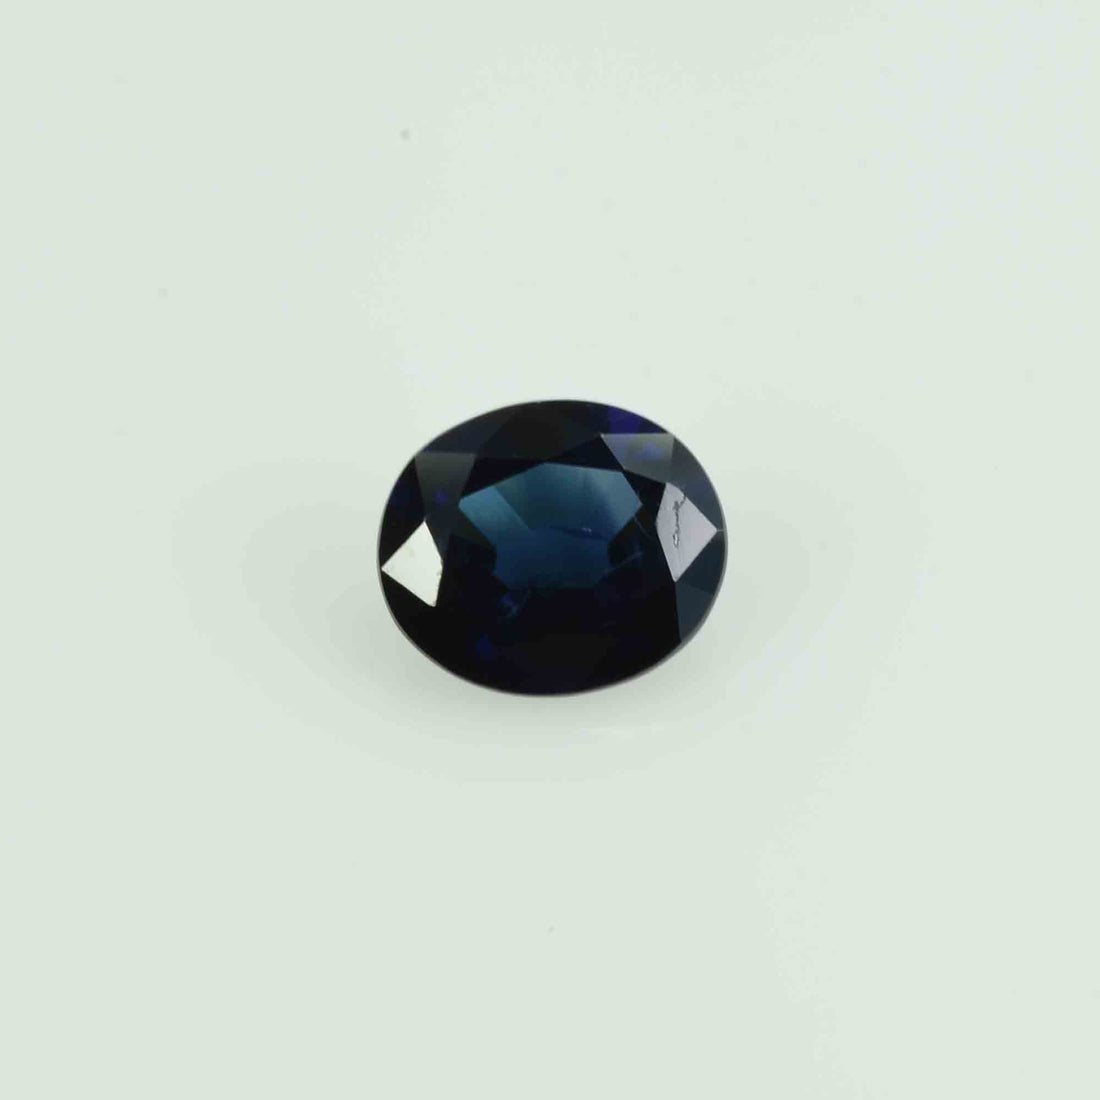 0.80 cts Natural Blue Sapphire Loose Gemstone Oval Cut